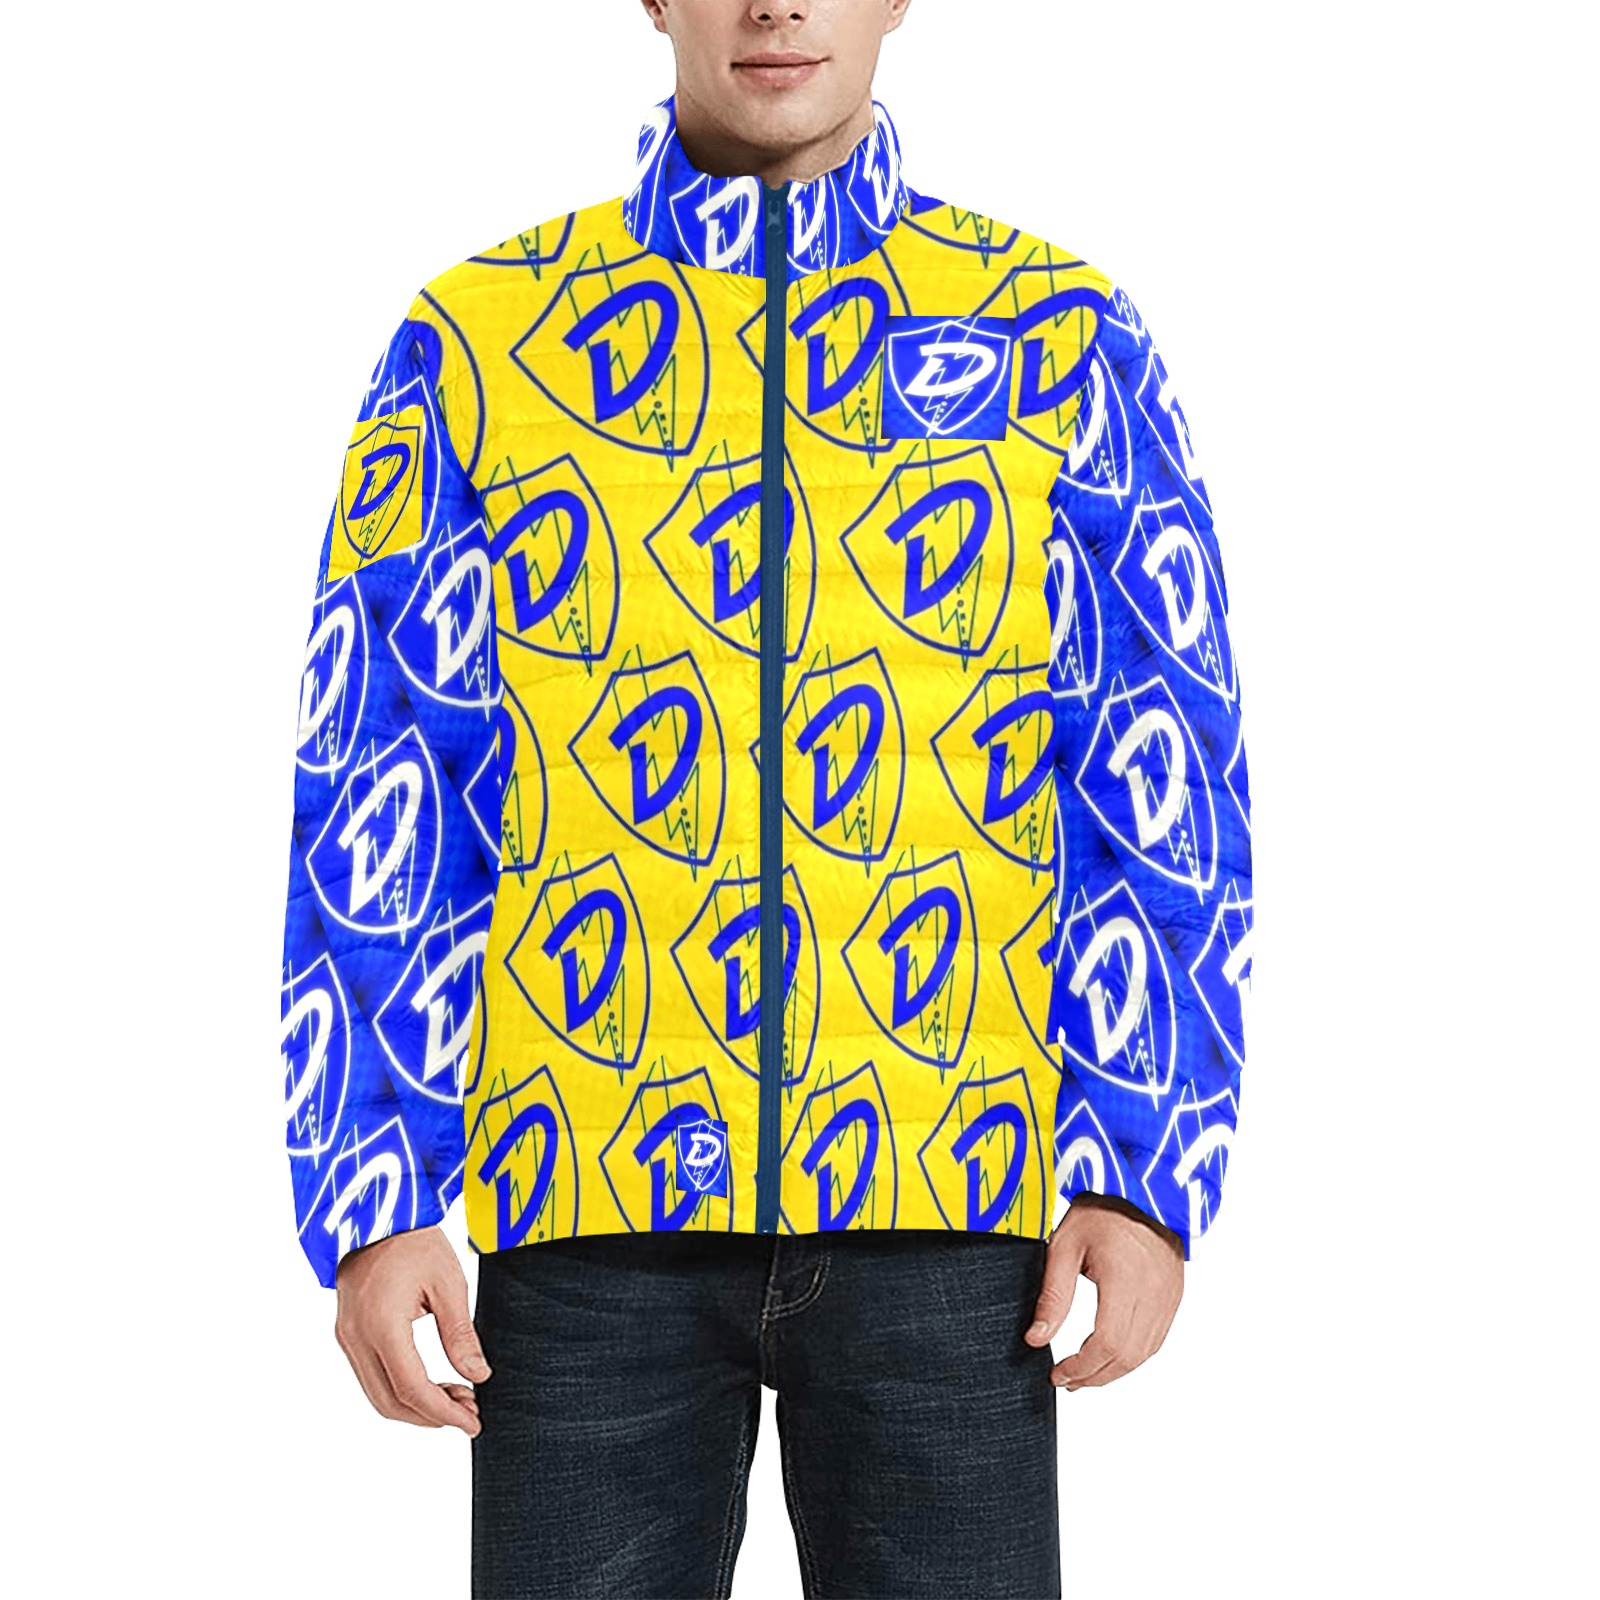 DIONIO Clothing - Big D Shield Puffy Jacket (Blue & Yellow,Blue & White Logo) Men's Stand Collar Padded Jacket (Model H41)